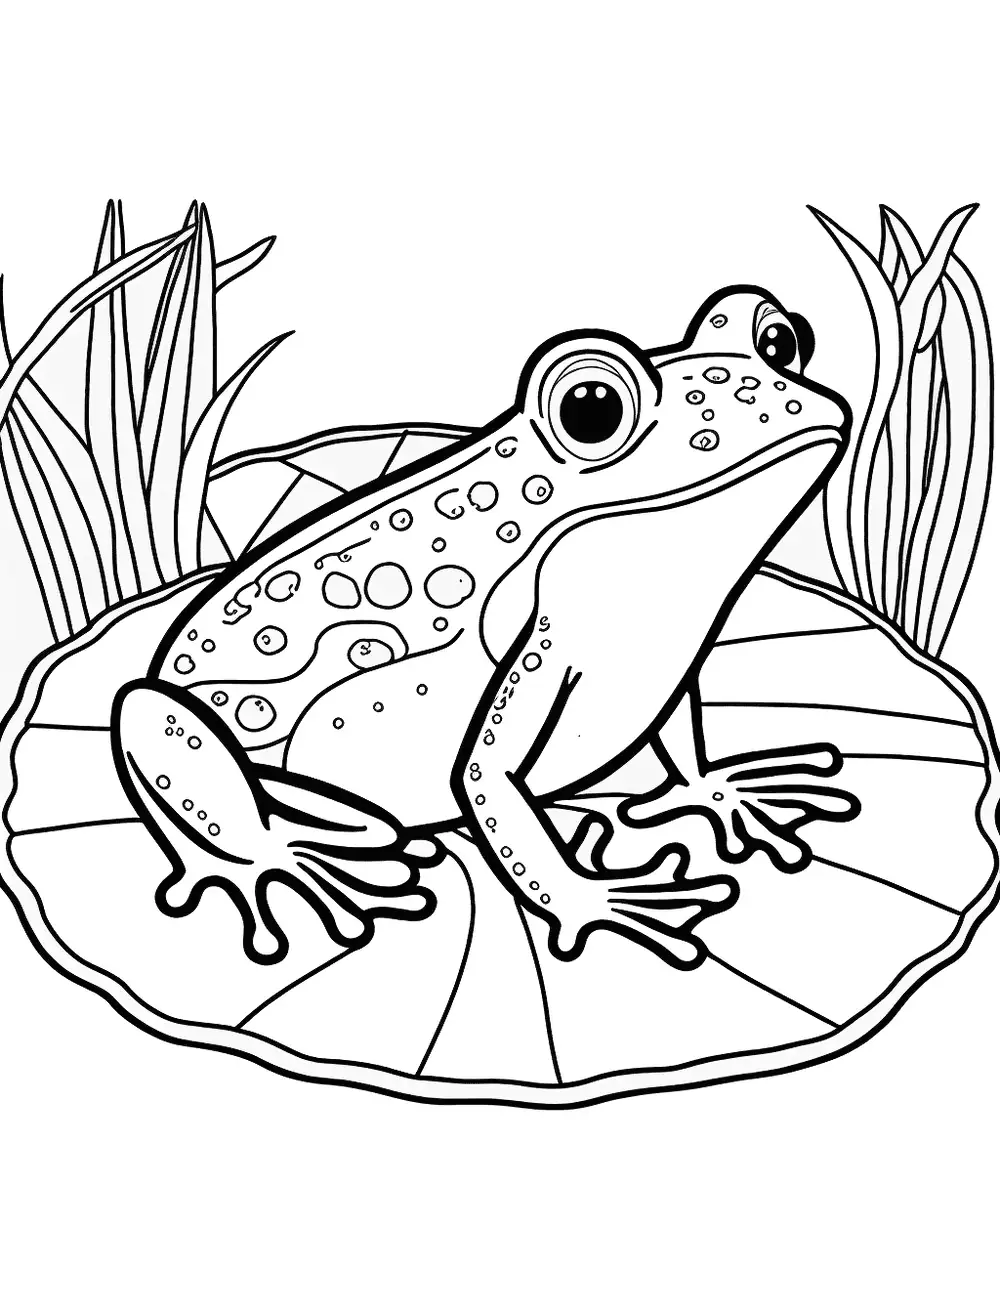 Frog On a Lily Pad Coloring Page - A frog sitting on lily pads in a pond.